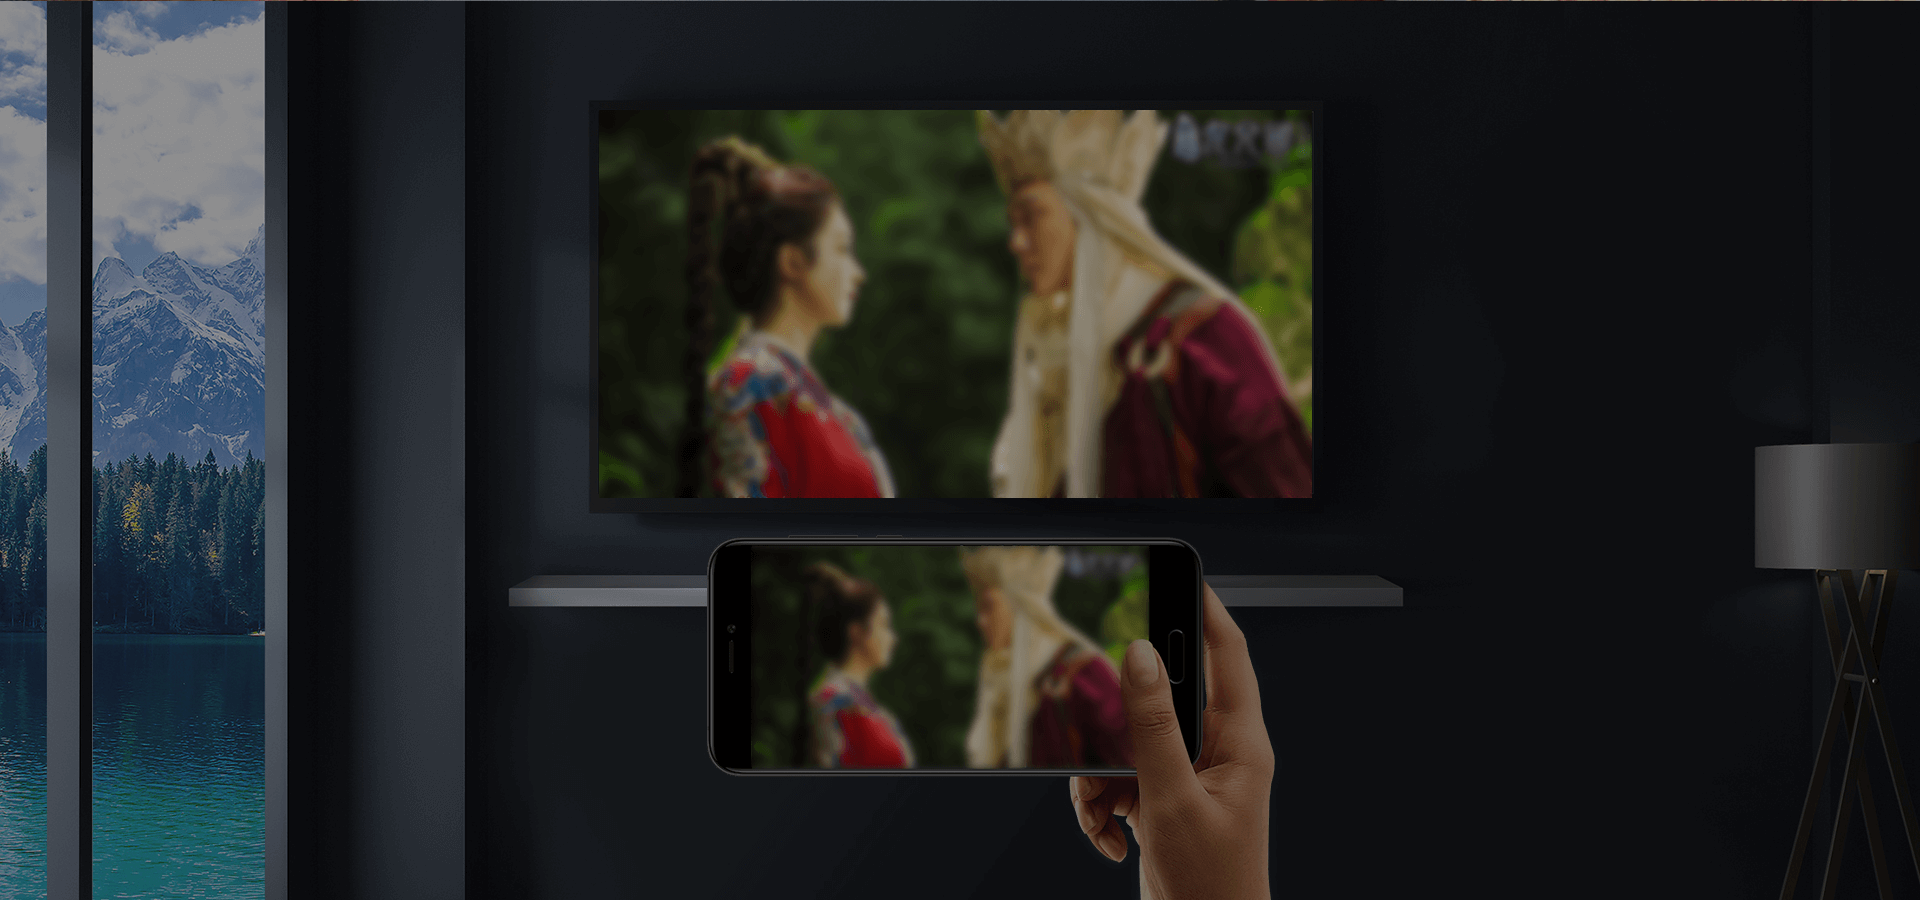 You don't need a TV VIP. Mobile phone VIPs can cast their phone content to their TVs. With one click, you can cast and watch your content on a big screen.